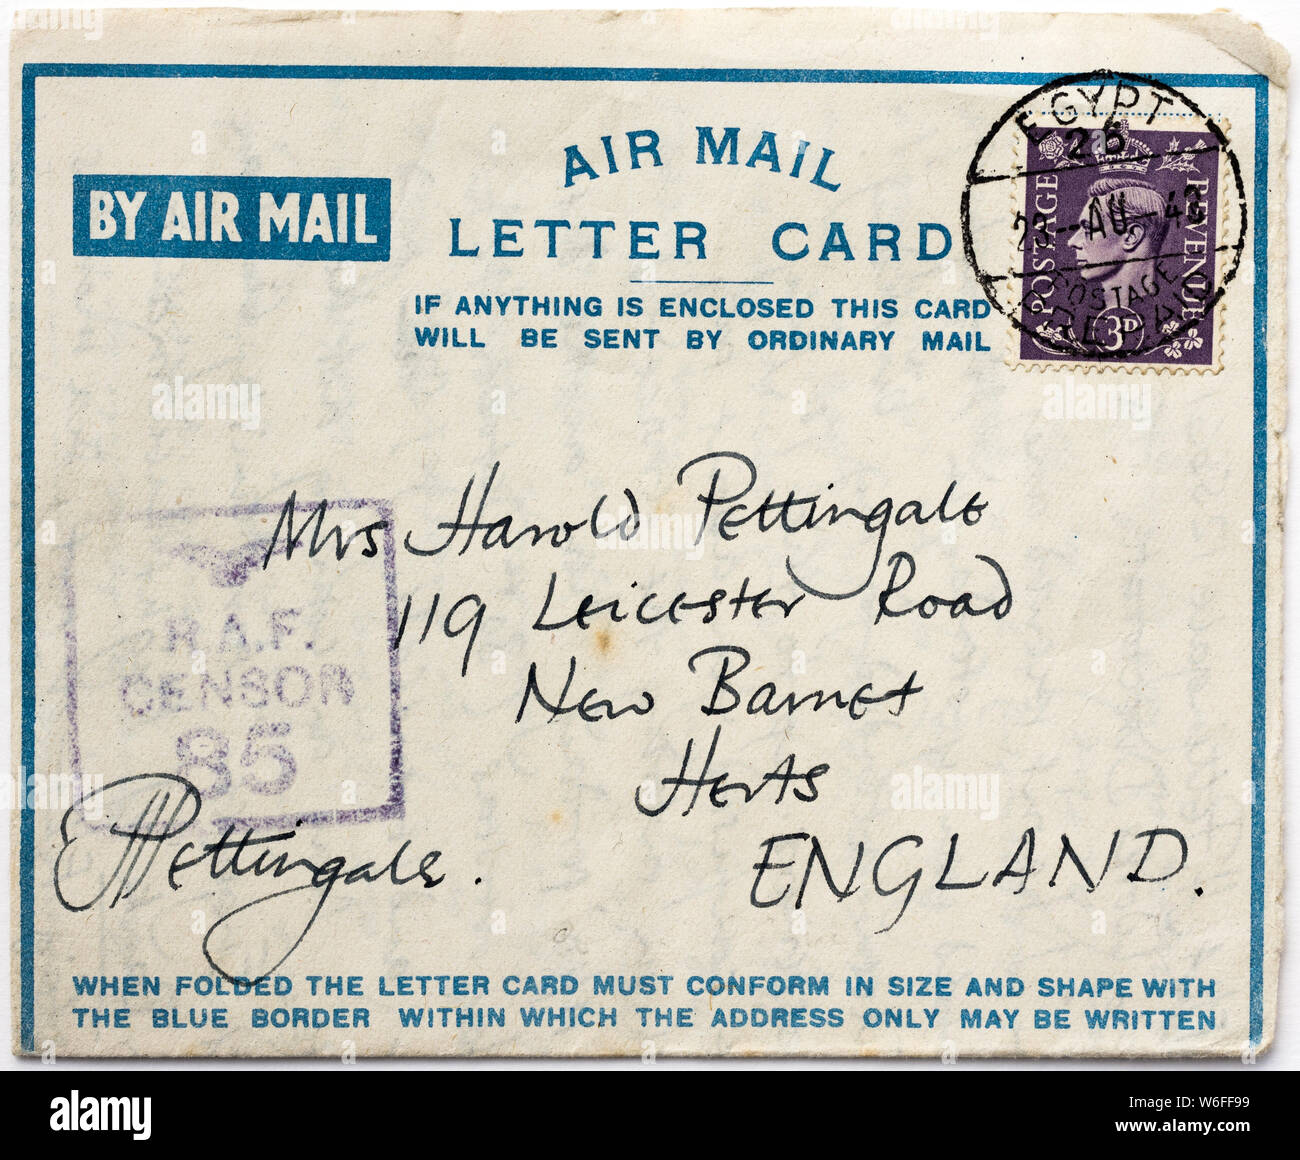 Censored air-mail letter card sent from Egypt to the UK during WW2. Stock Photo